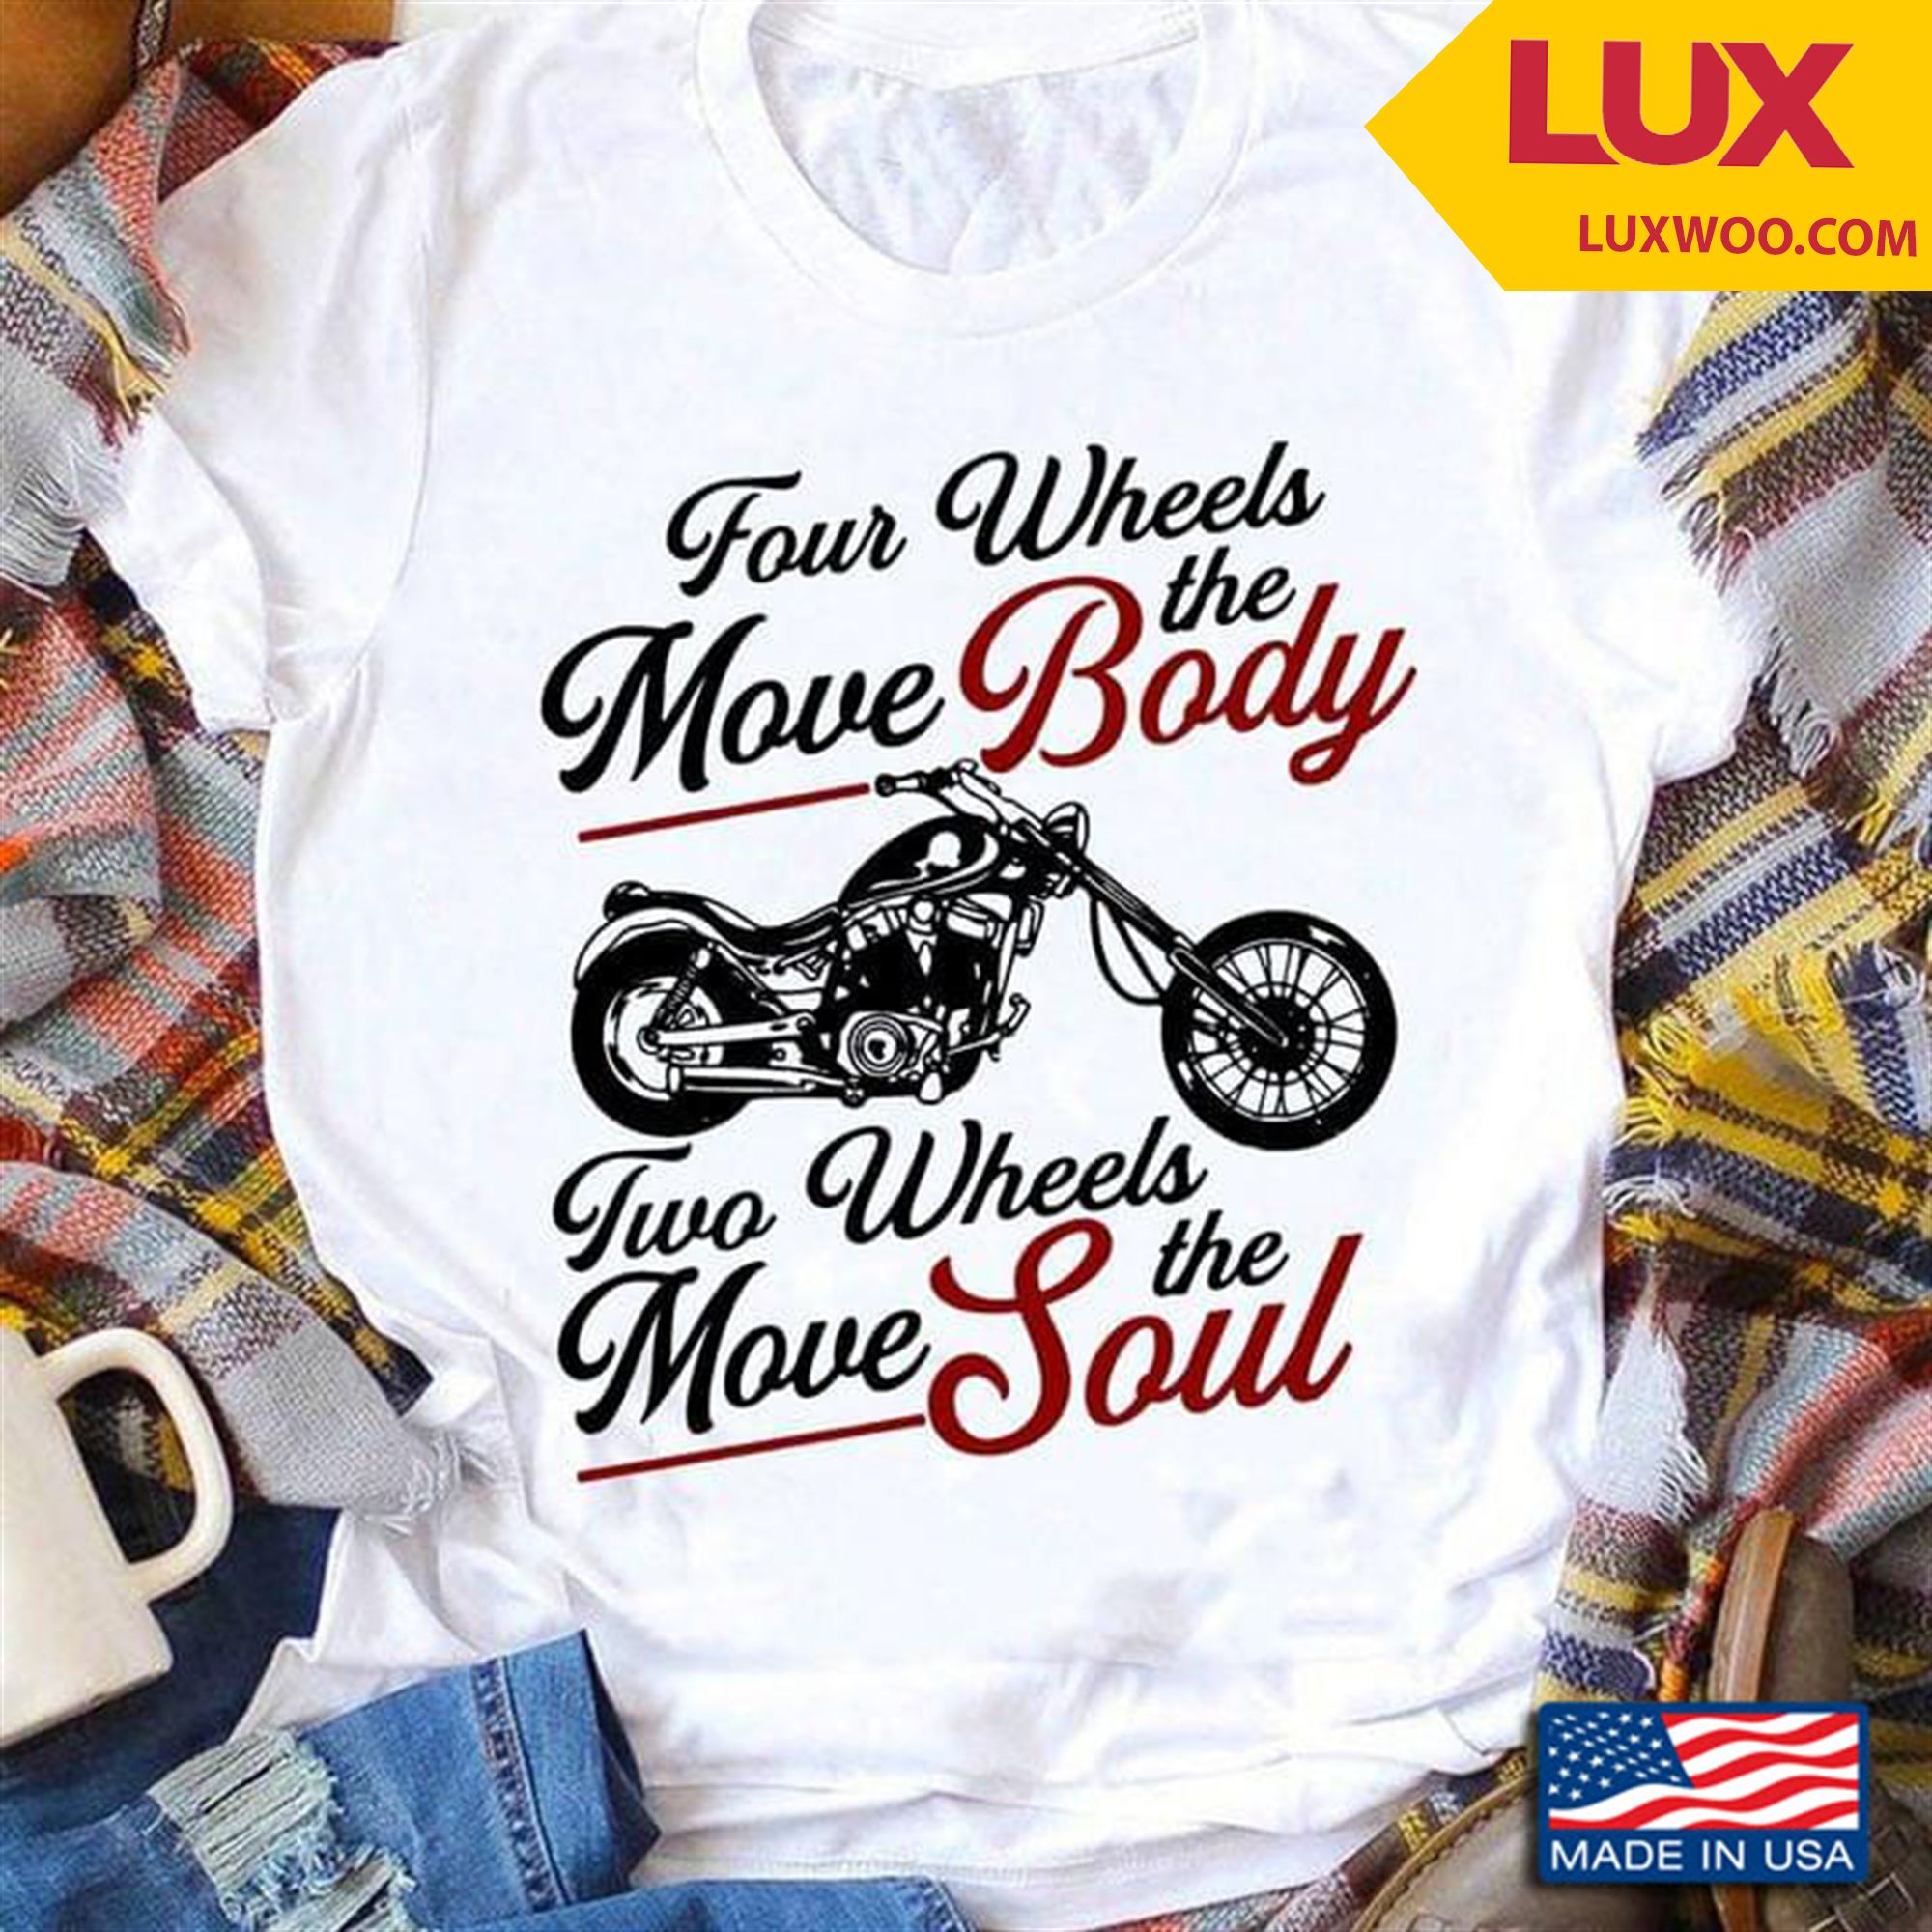 Four Wheels Move The Body Two Wheels Move The Soul Motorcycle New Version Shirt Plus Size Up To 5xl